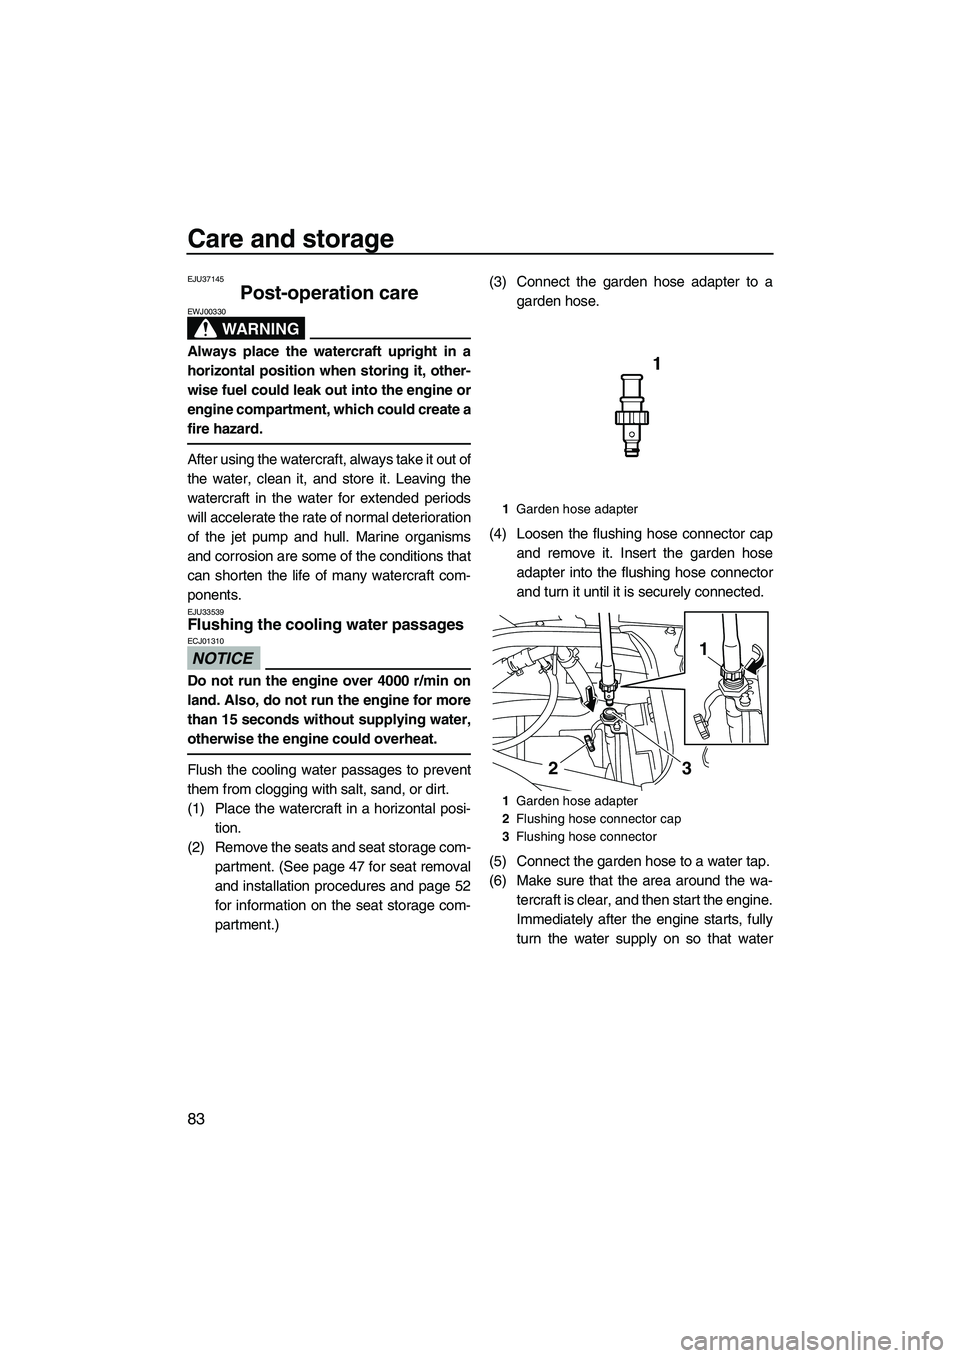 YAMAHA FX SHO 2010  Owners Manual Care and storage
83
EJU37145
Post-operation care 
WARNING
EWJ00330
Always place the watercraft upright in a
horizontal position when storing it, other-
wise fuel could leak out into the engine or
engi